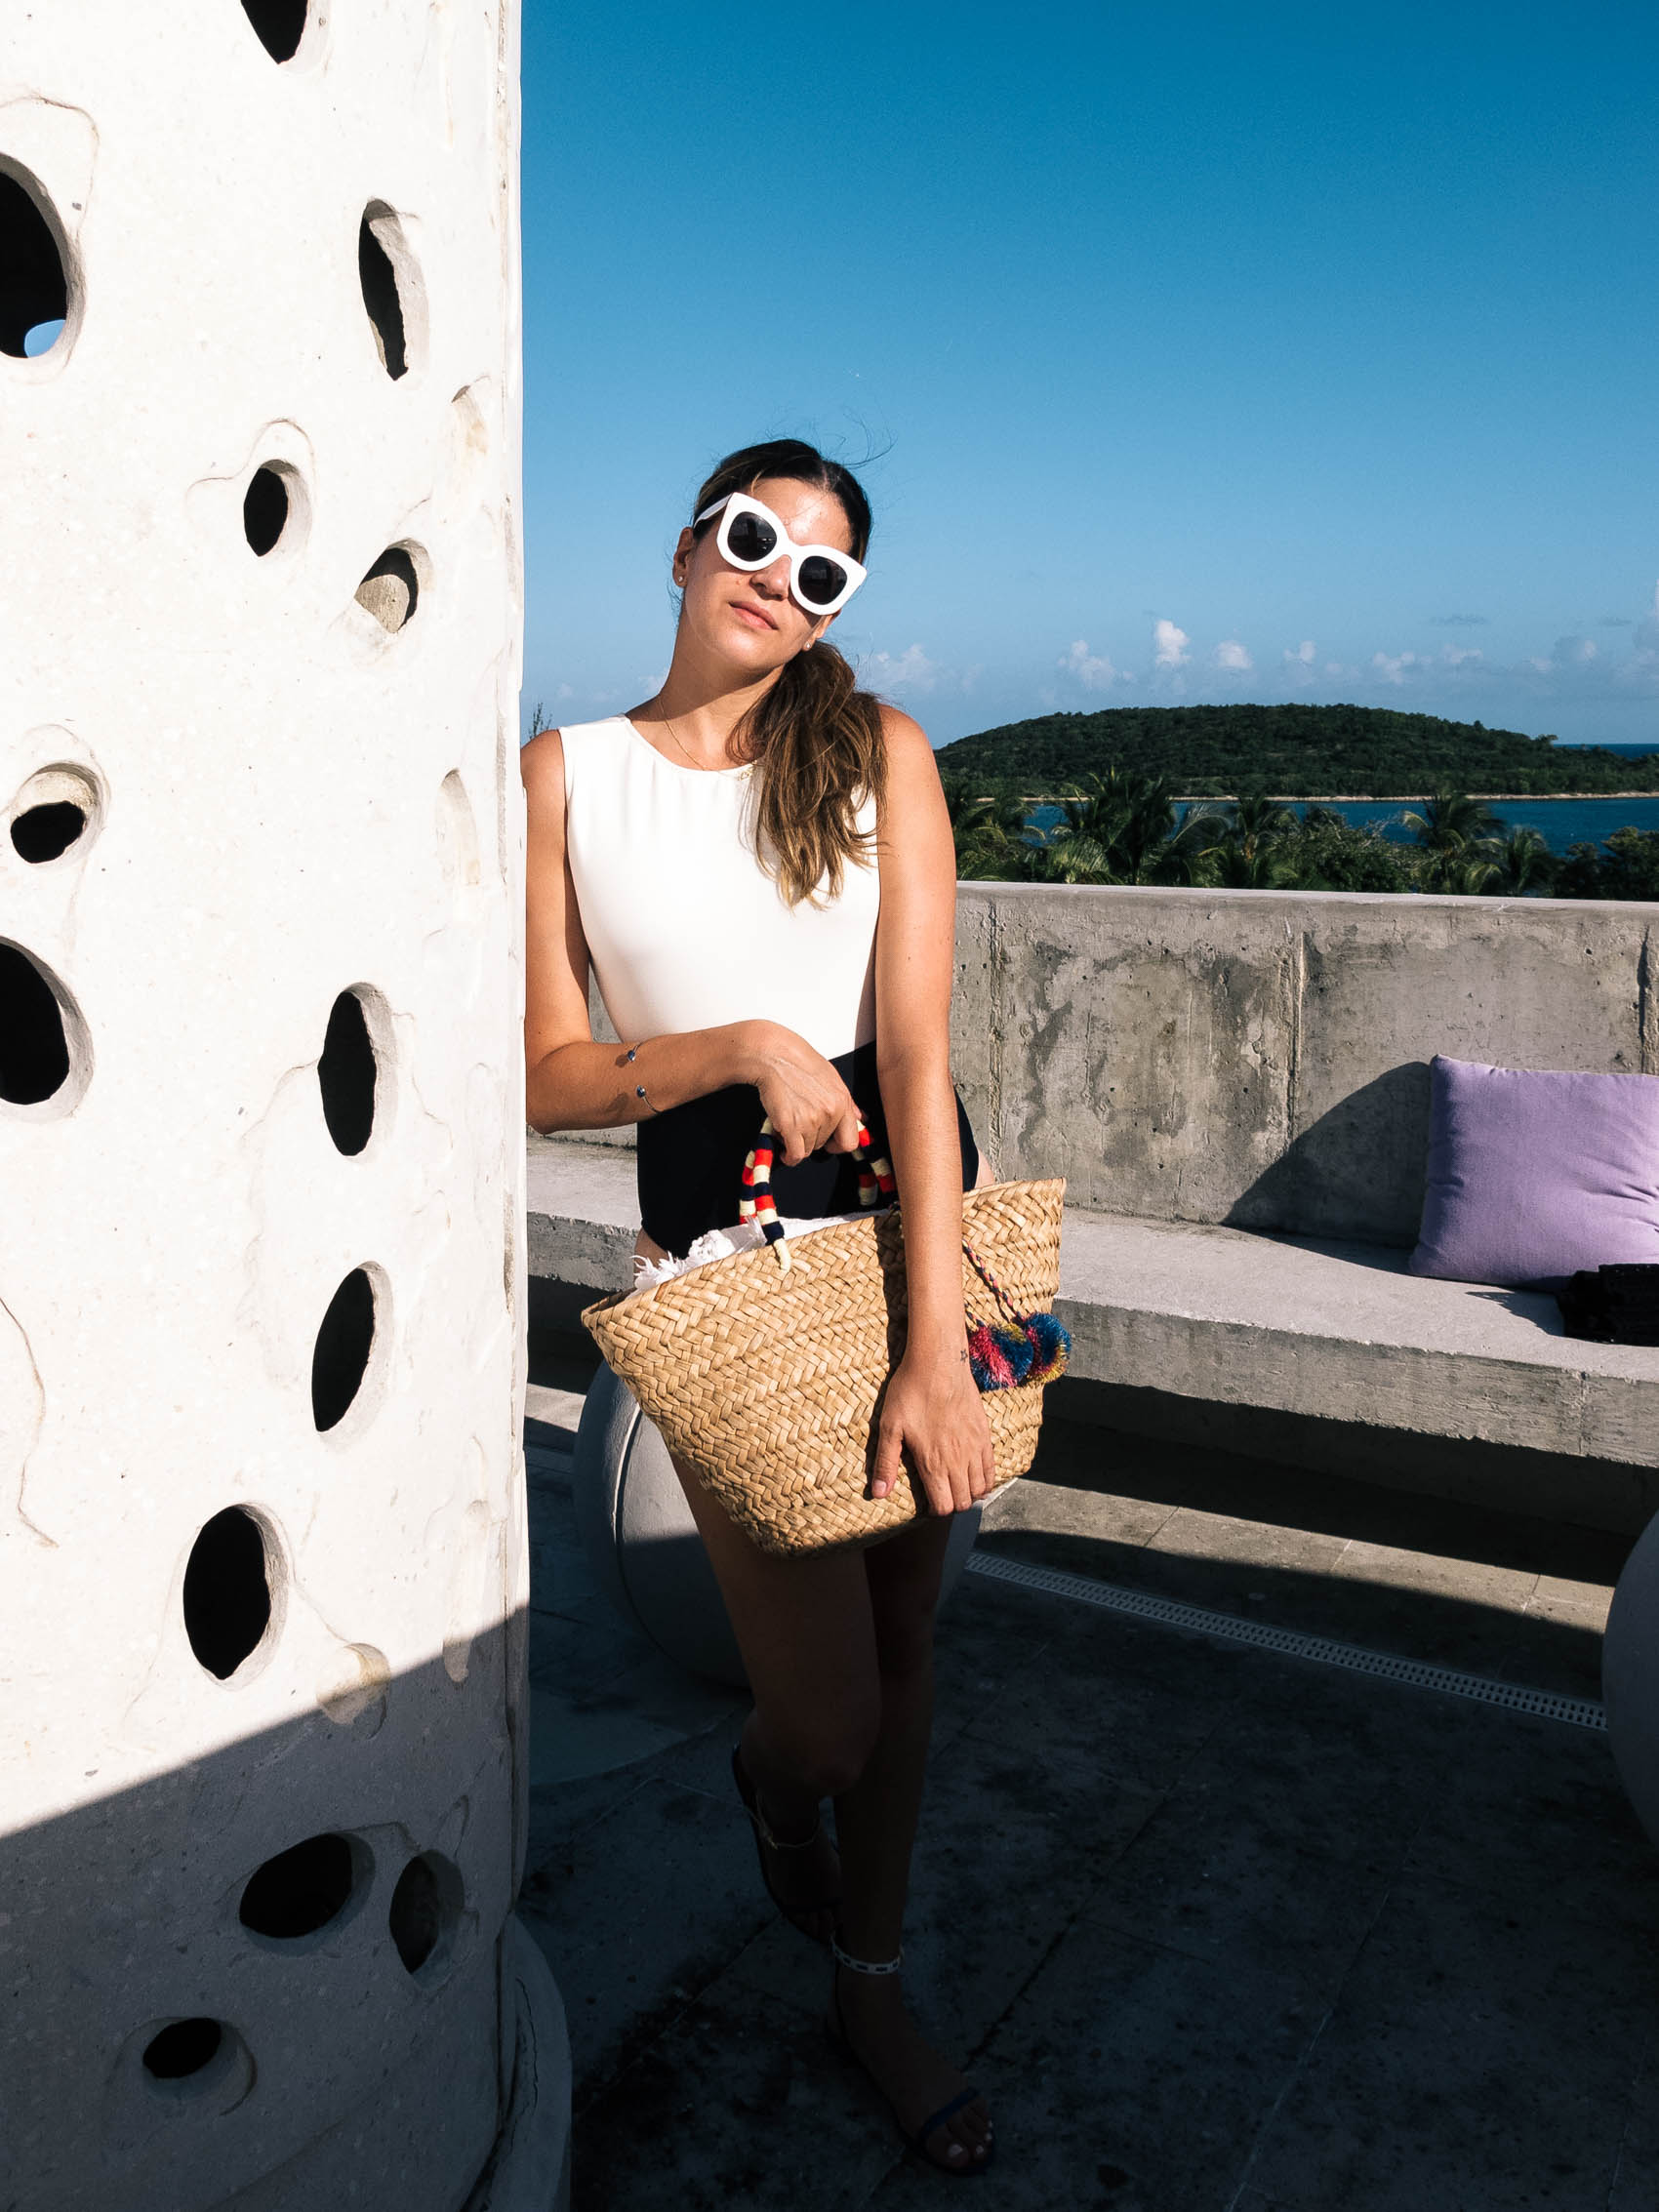 Maristella wearing Celine sunglasses, Lenny Niemeyer one piece bathing suit and a straw tote bag with poms at El Blok hotel in Vieques Island Puerto Rico